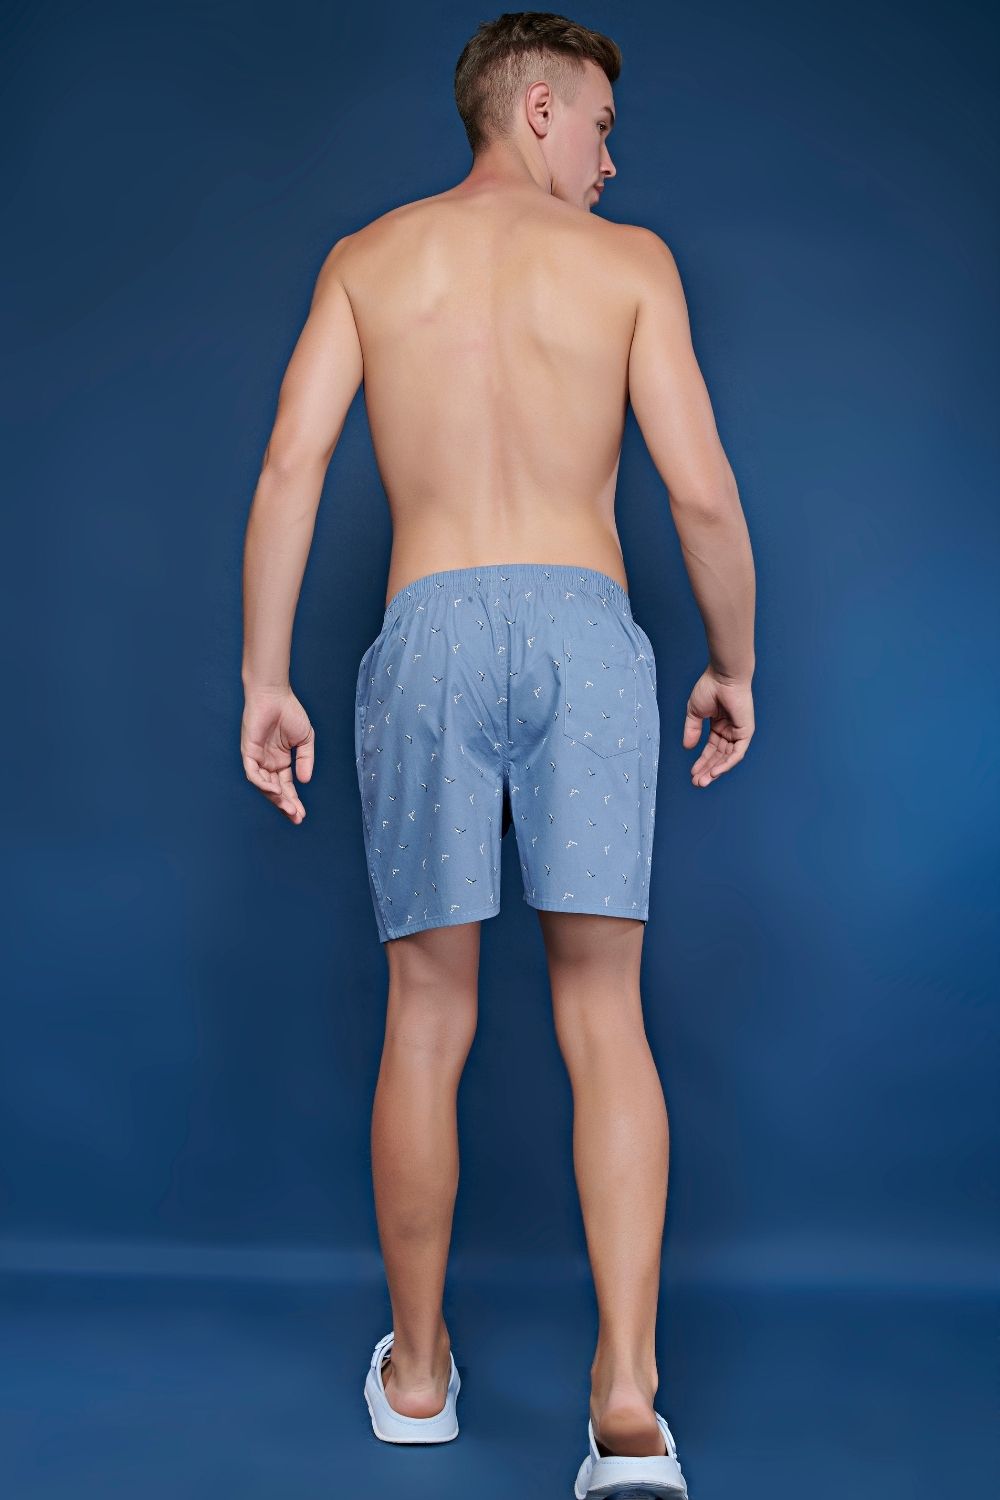 C. G. Blue colored all over printed cotton boxer for men with back pockets, back.